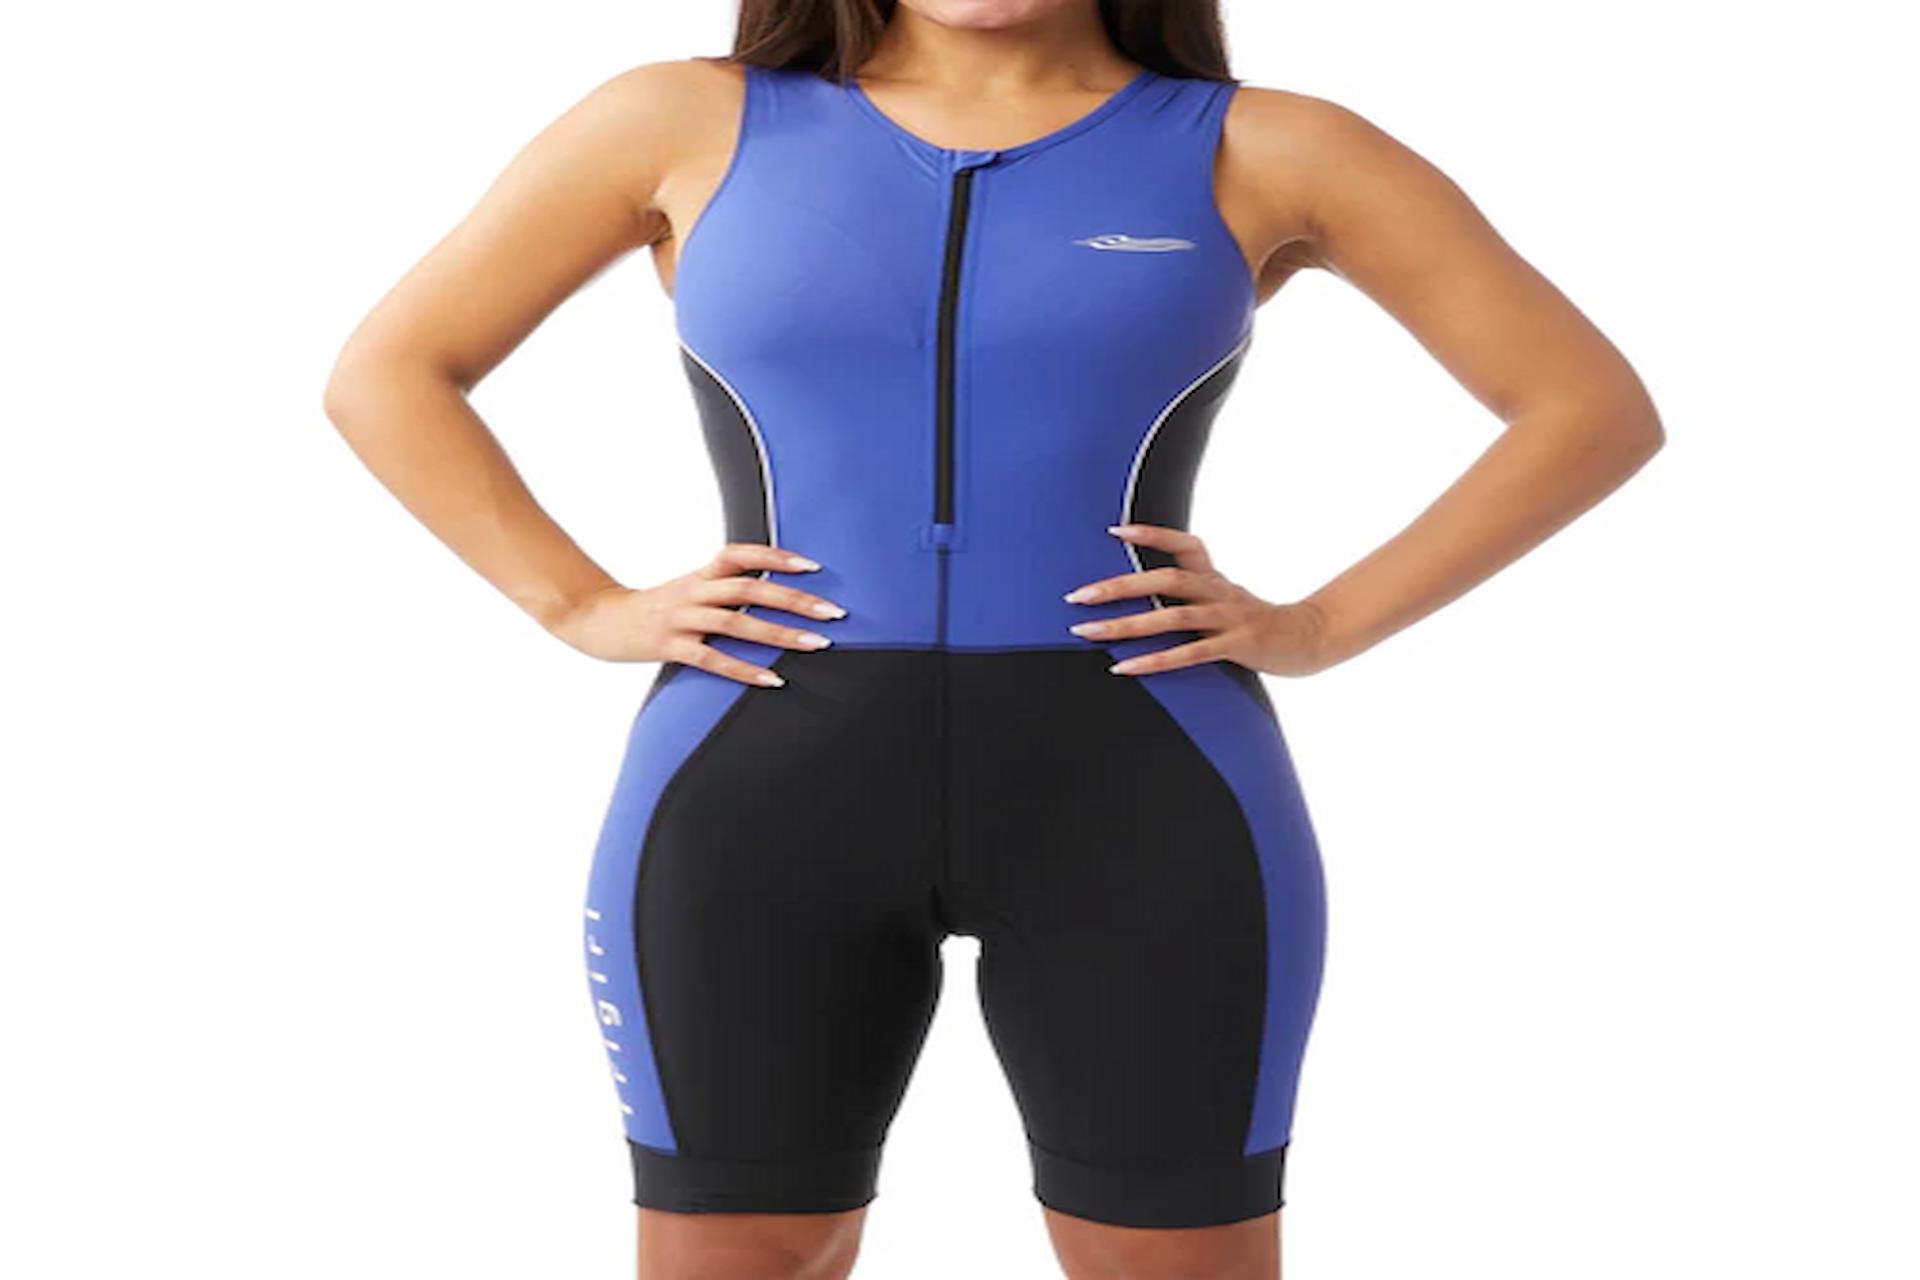 The Ultimate Guide To Choosing The Right Tri Suits